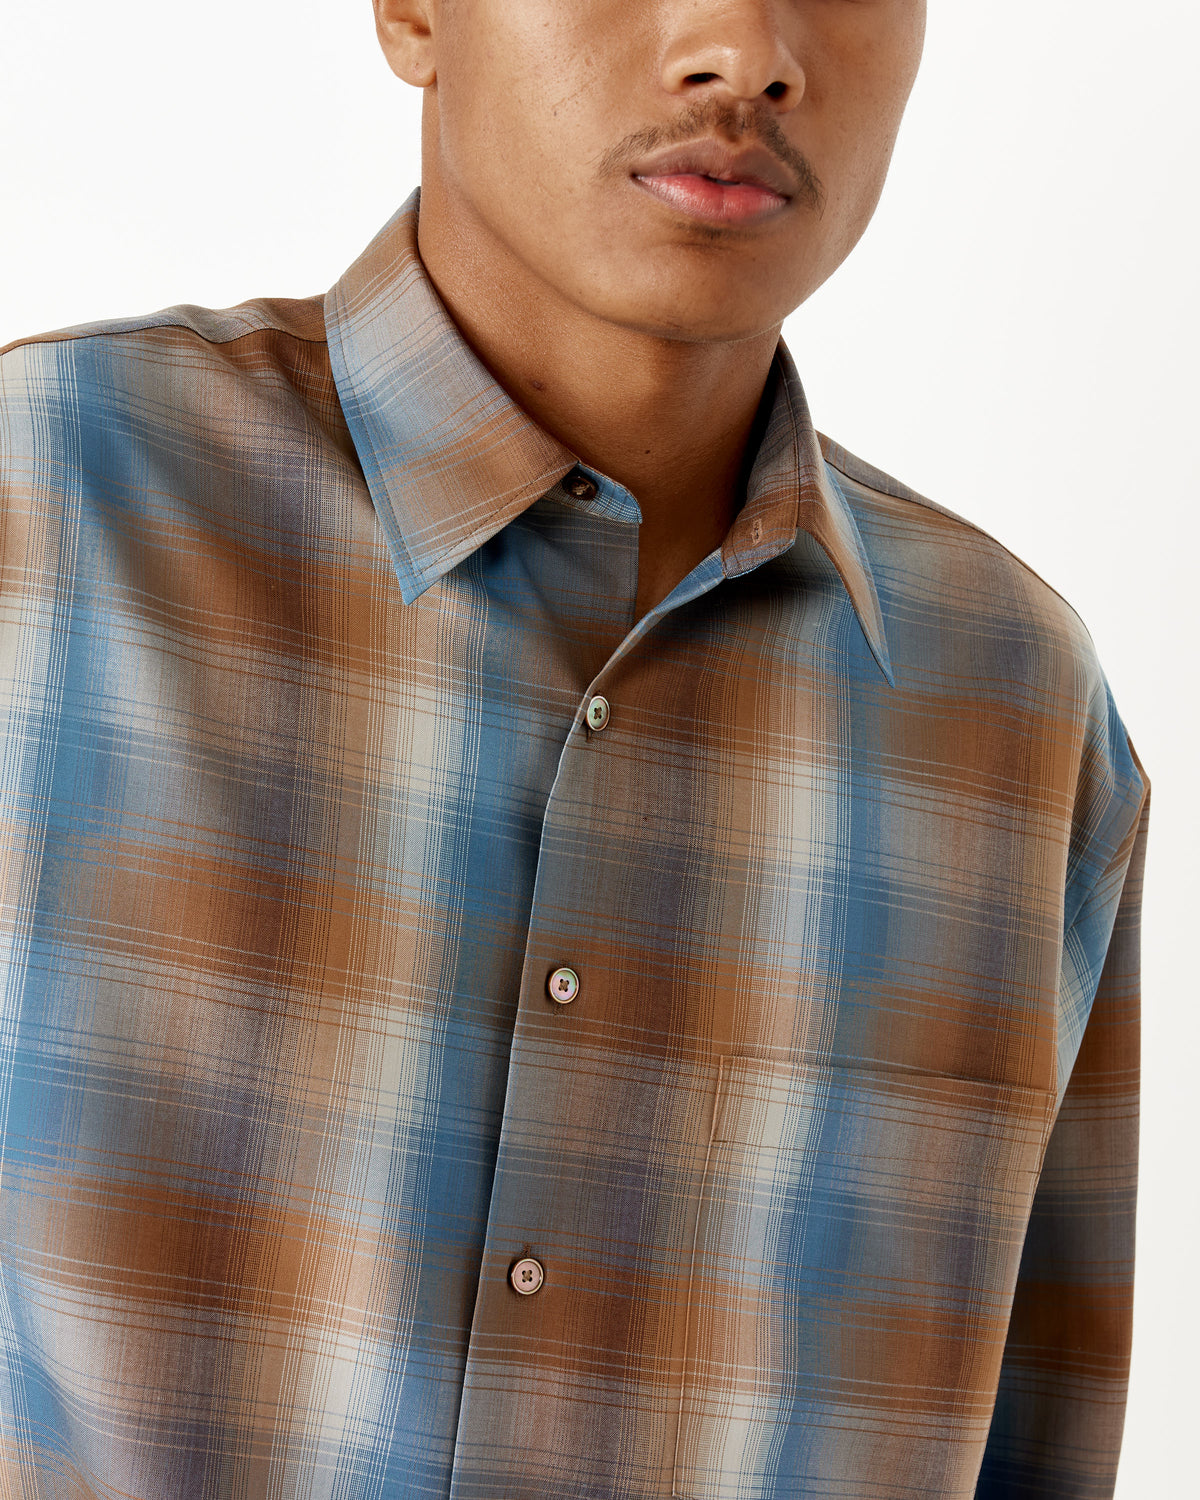 Check Out Our Exciting Line of Super Light Wool Check Shirt Auralee .  Unique Designs You'll Never Find Anywhere else